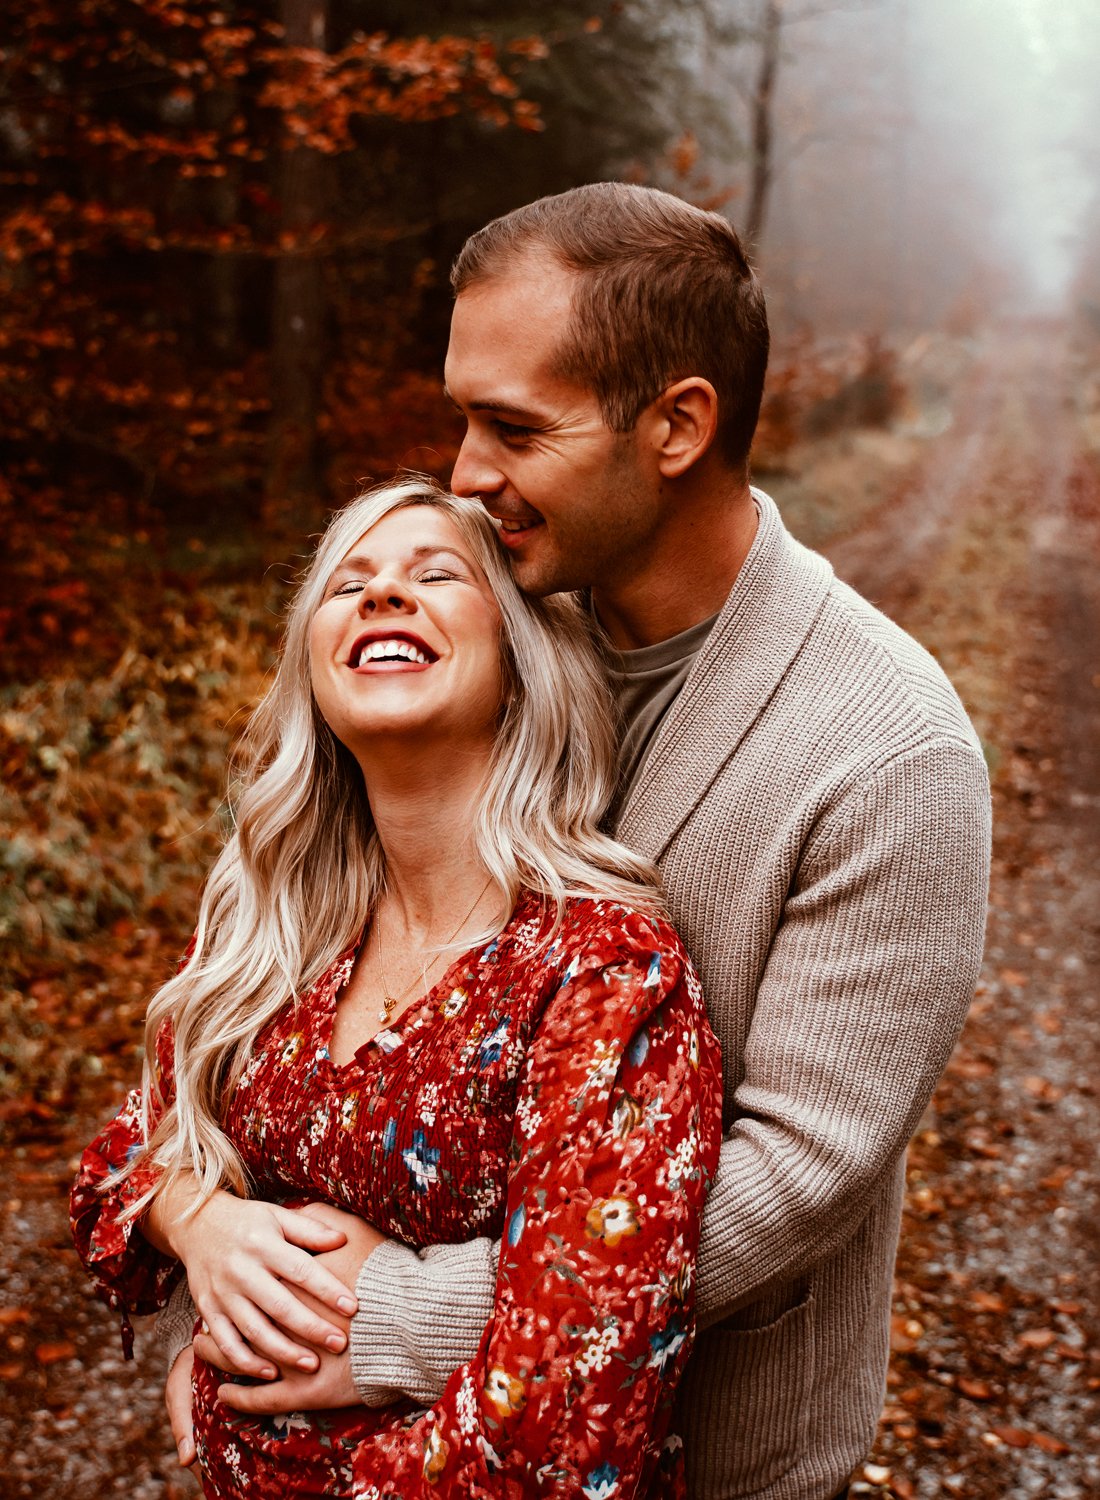 moody-maternity-couple-session-in-fall-season-in-wooded-forest-in-germany-by-motherhood-photographer-sarah-havens-ramtein (3).jpg